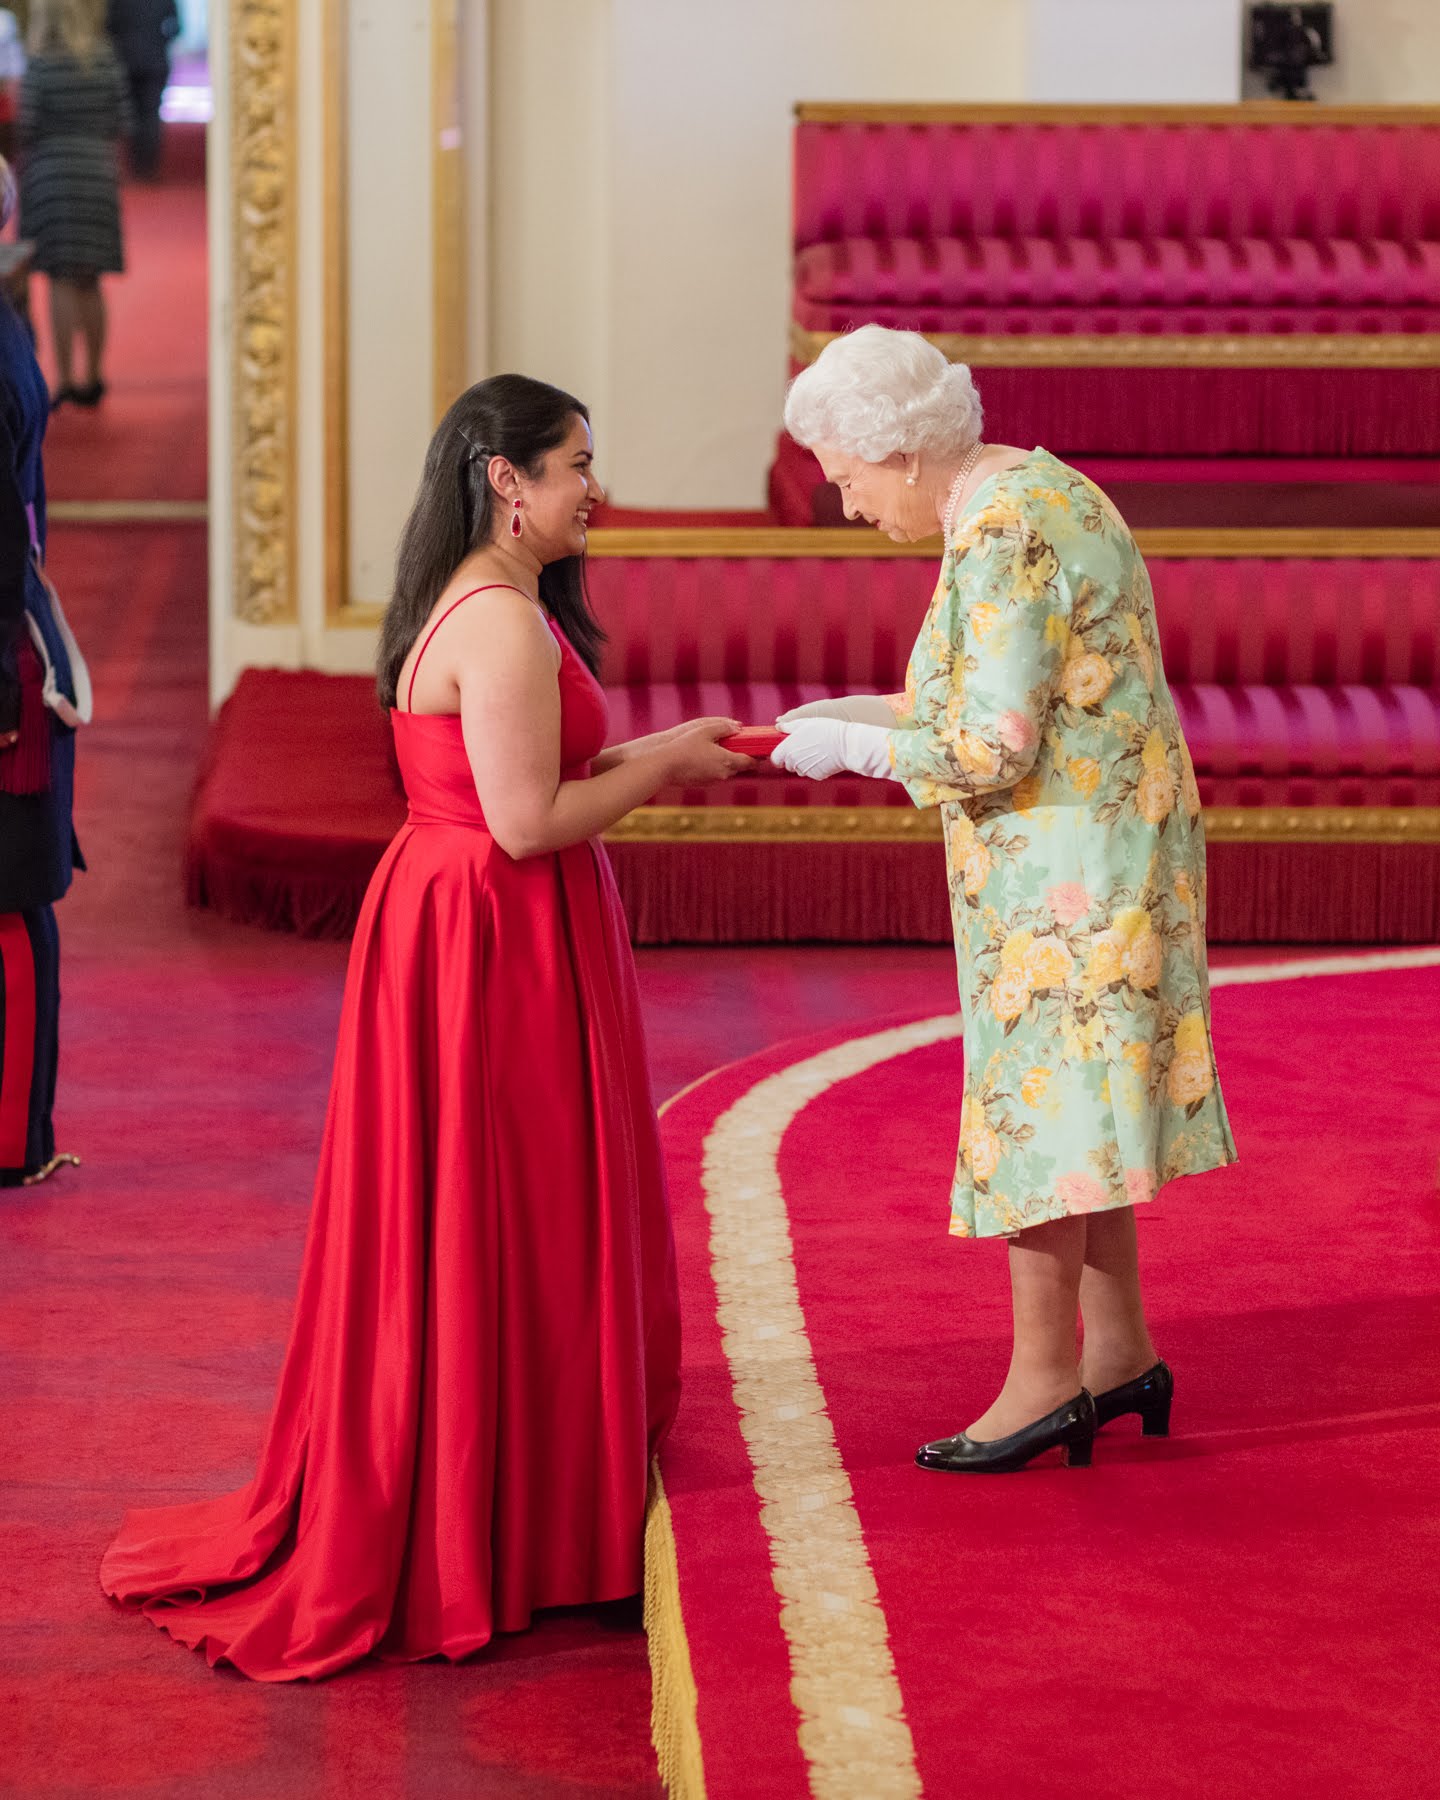 Ishita Aggarwal 2018 Queen's Young Leader from Canada